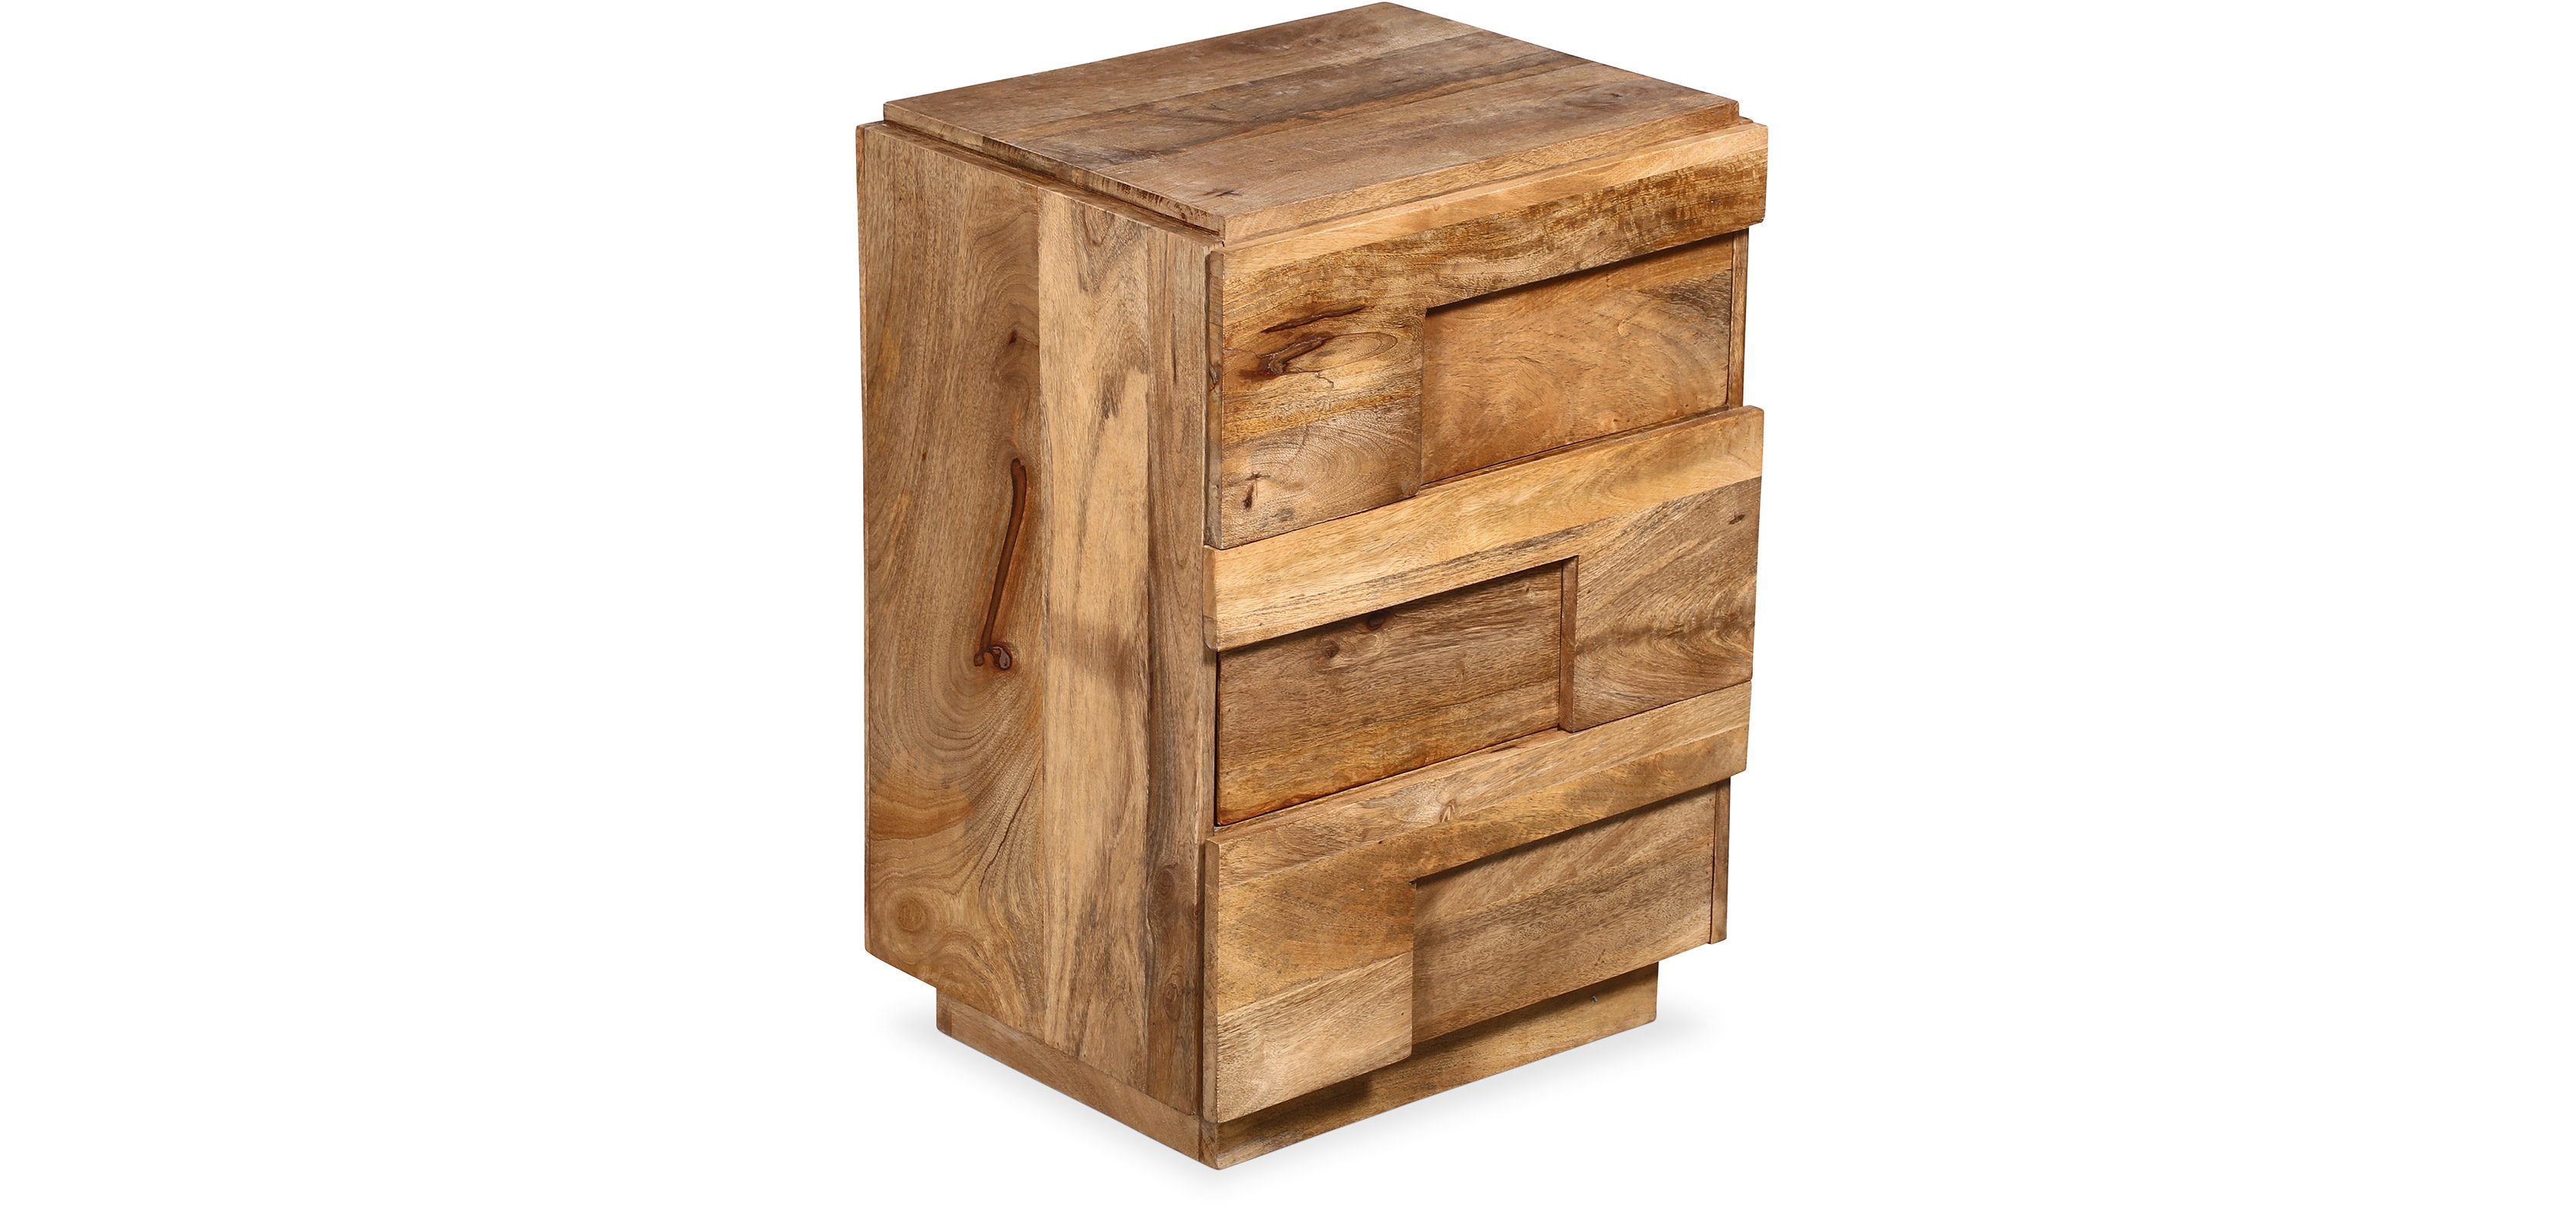 Buy Handmade wooden chest of drawers - Jakarta Natural wood 58878 in ...